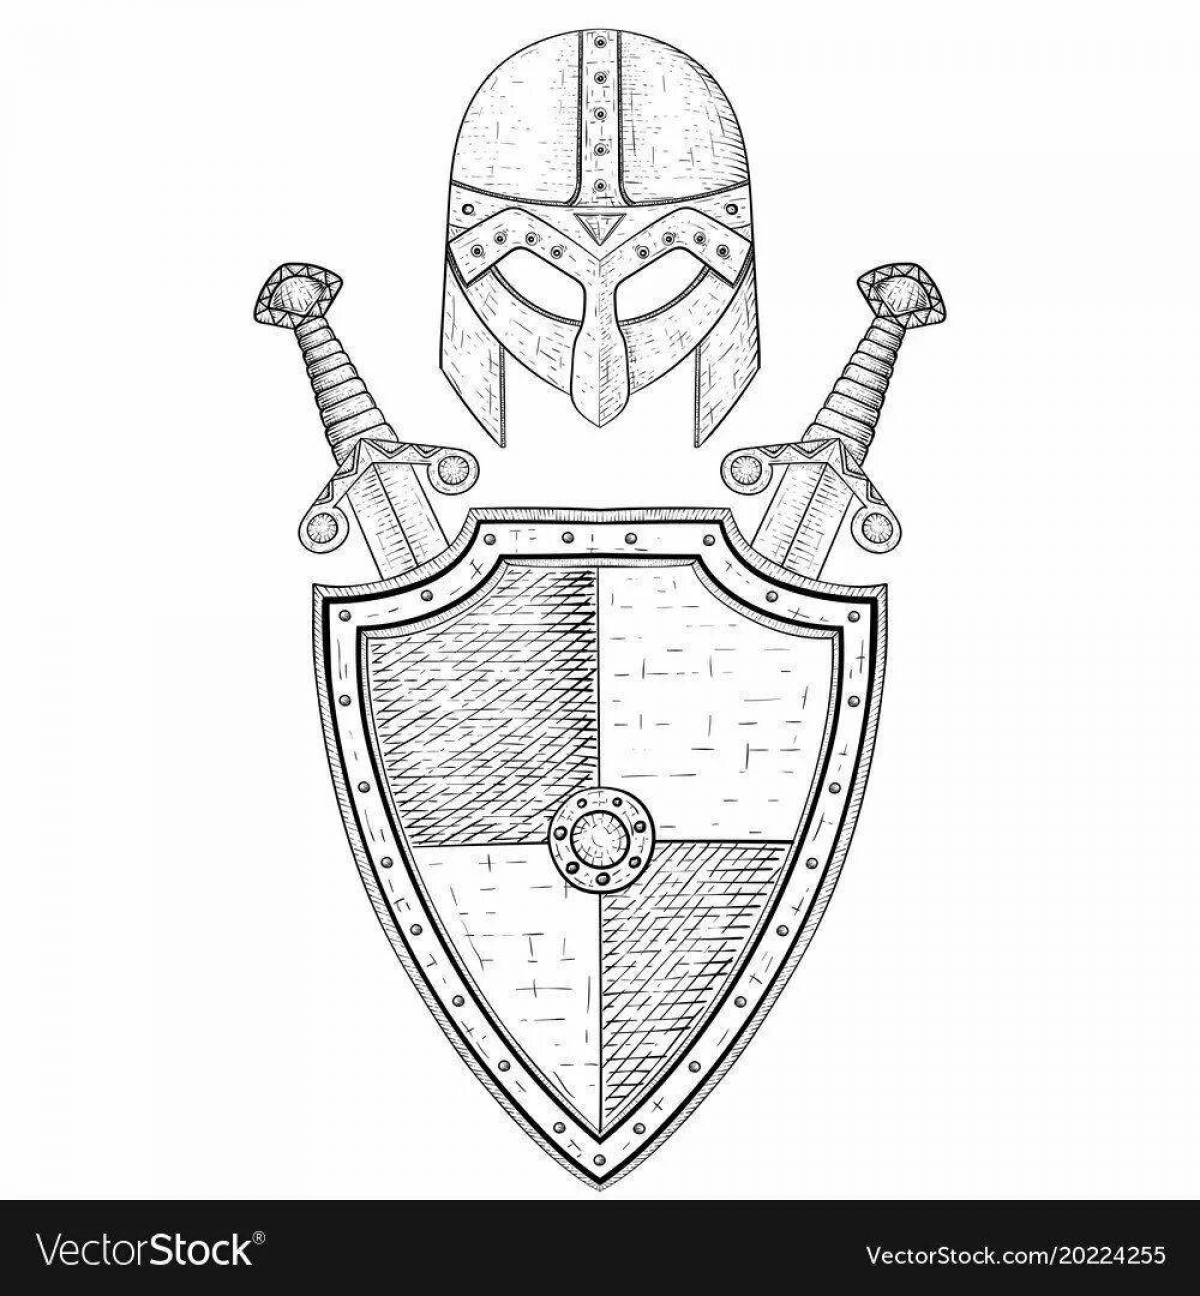 Amazing Hero Shield coloring page for kids